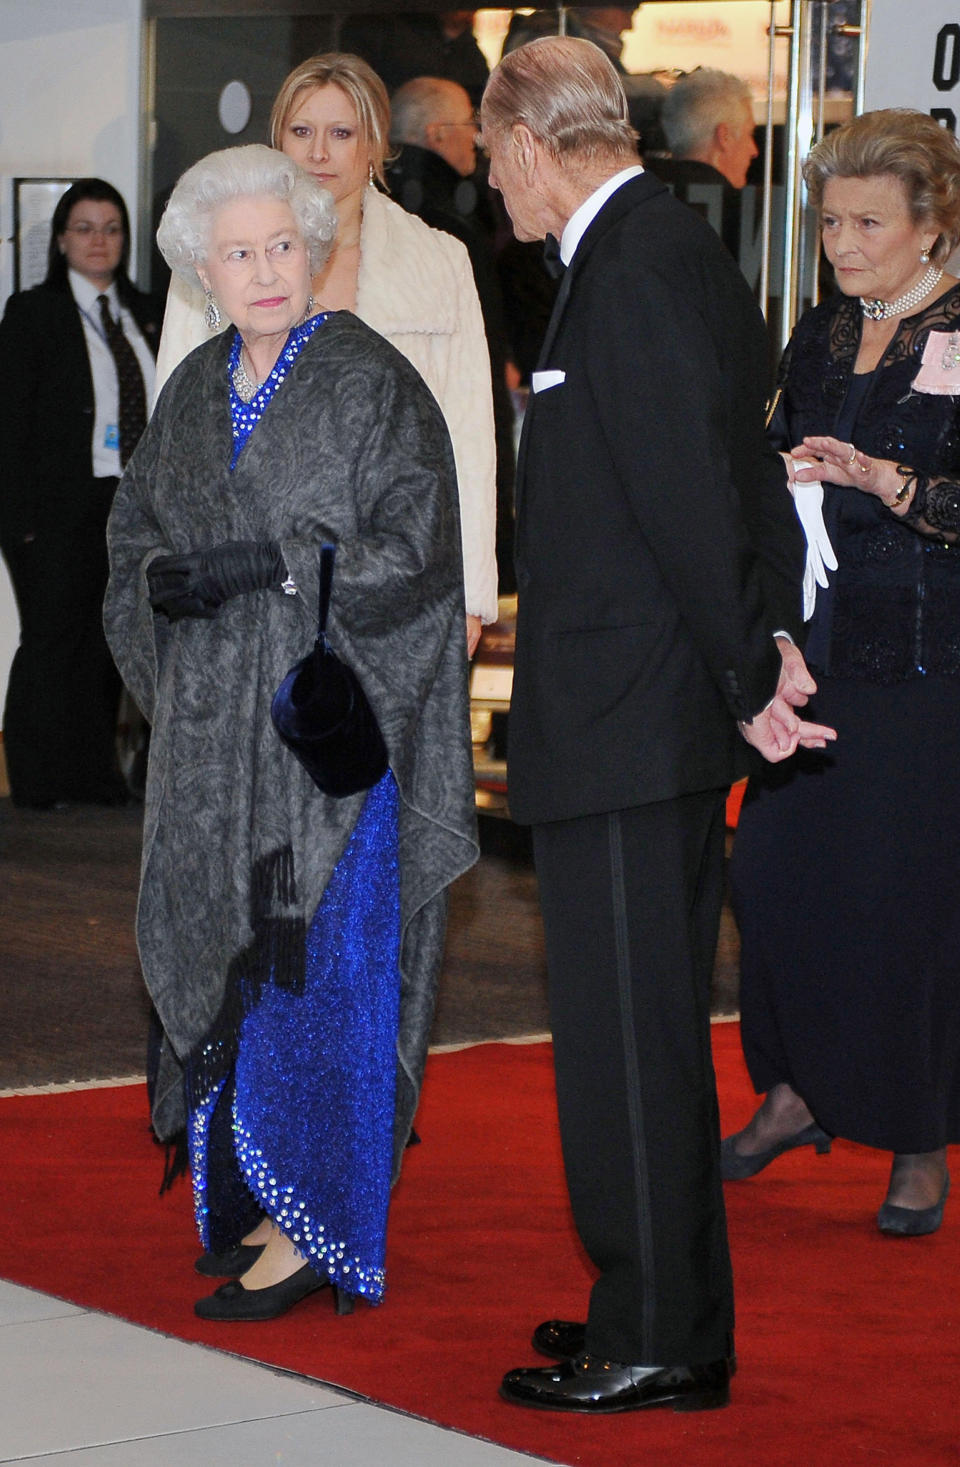 The Queen at a 2010 film premiere